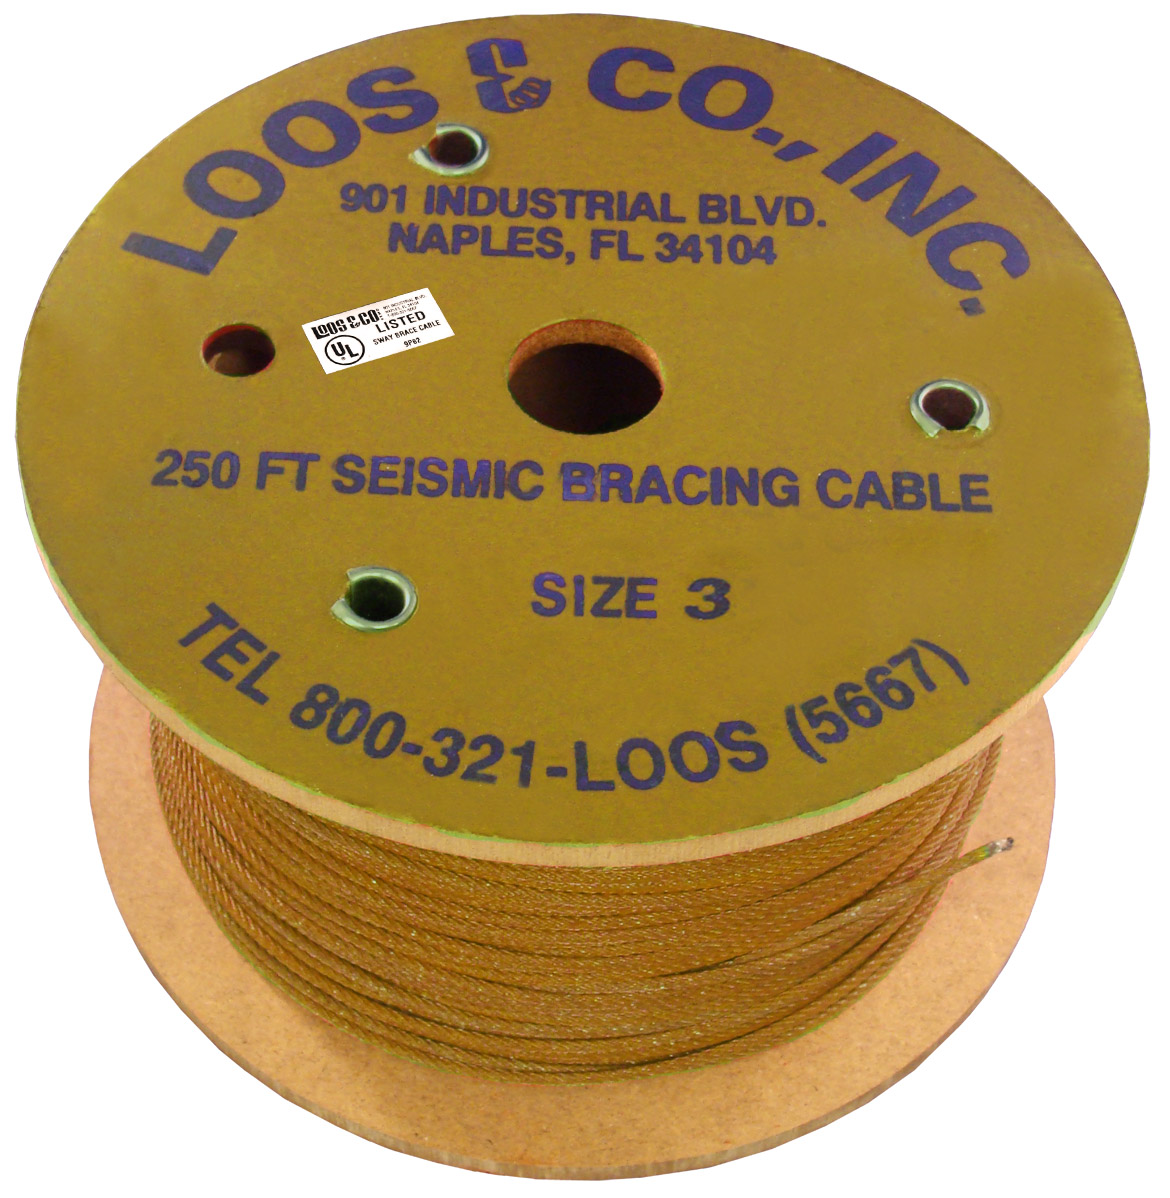 GO3-CBL Gold Cable - Loos & Co., Inc. Seismic Bracing Cable Products